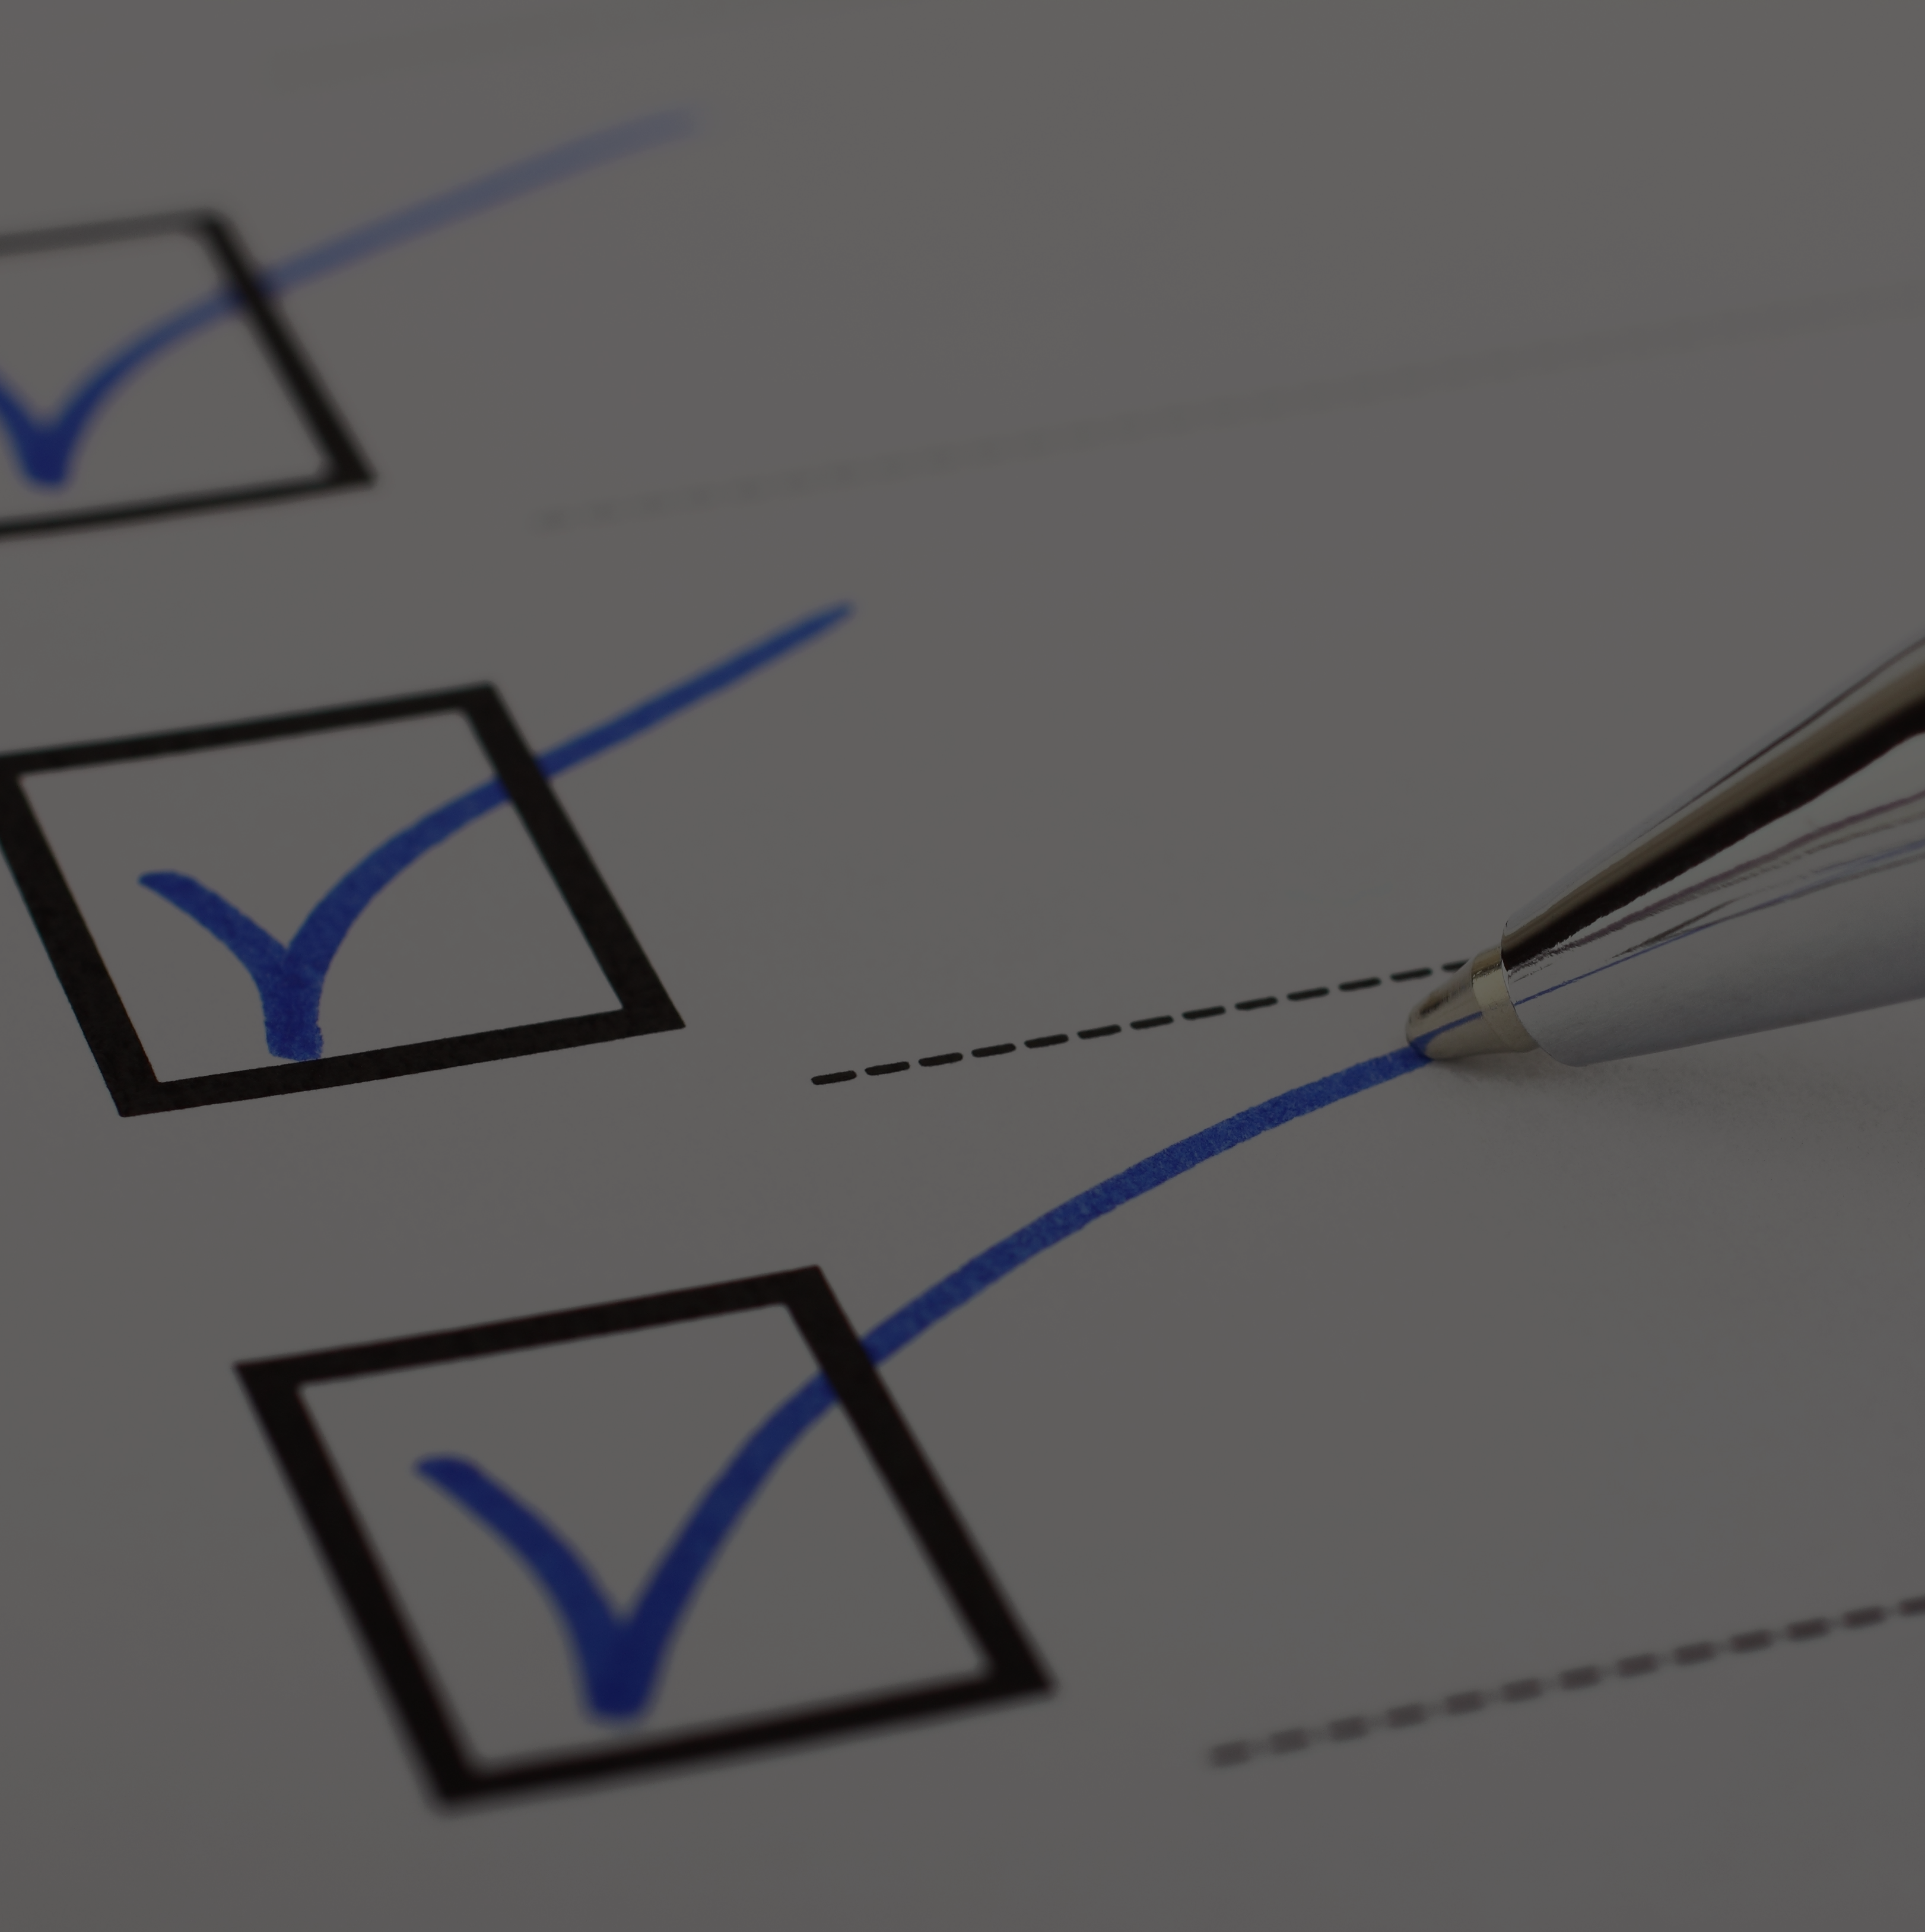 checkboxes with blue checkmarks and a pen on white paper